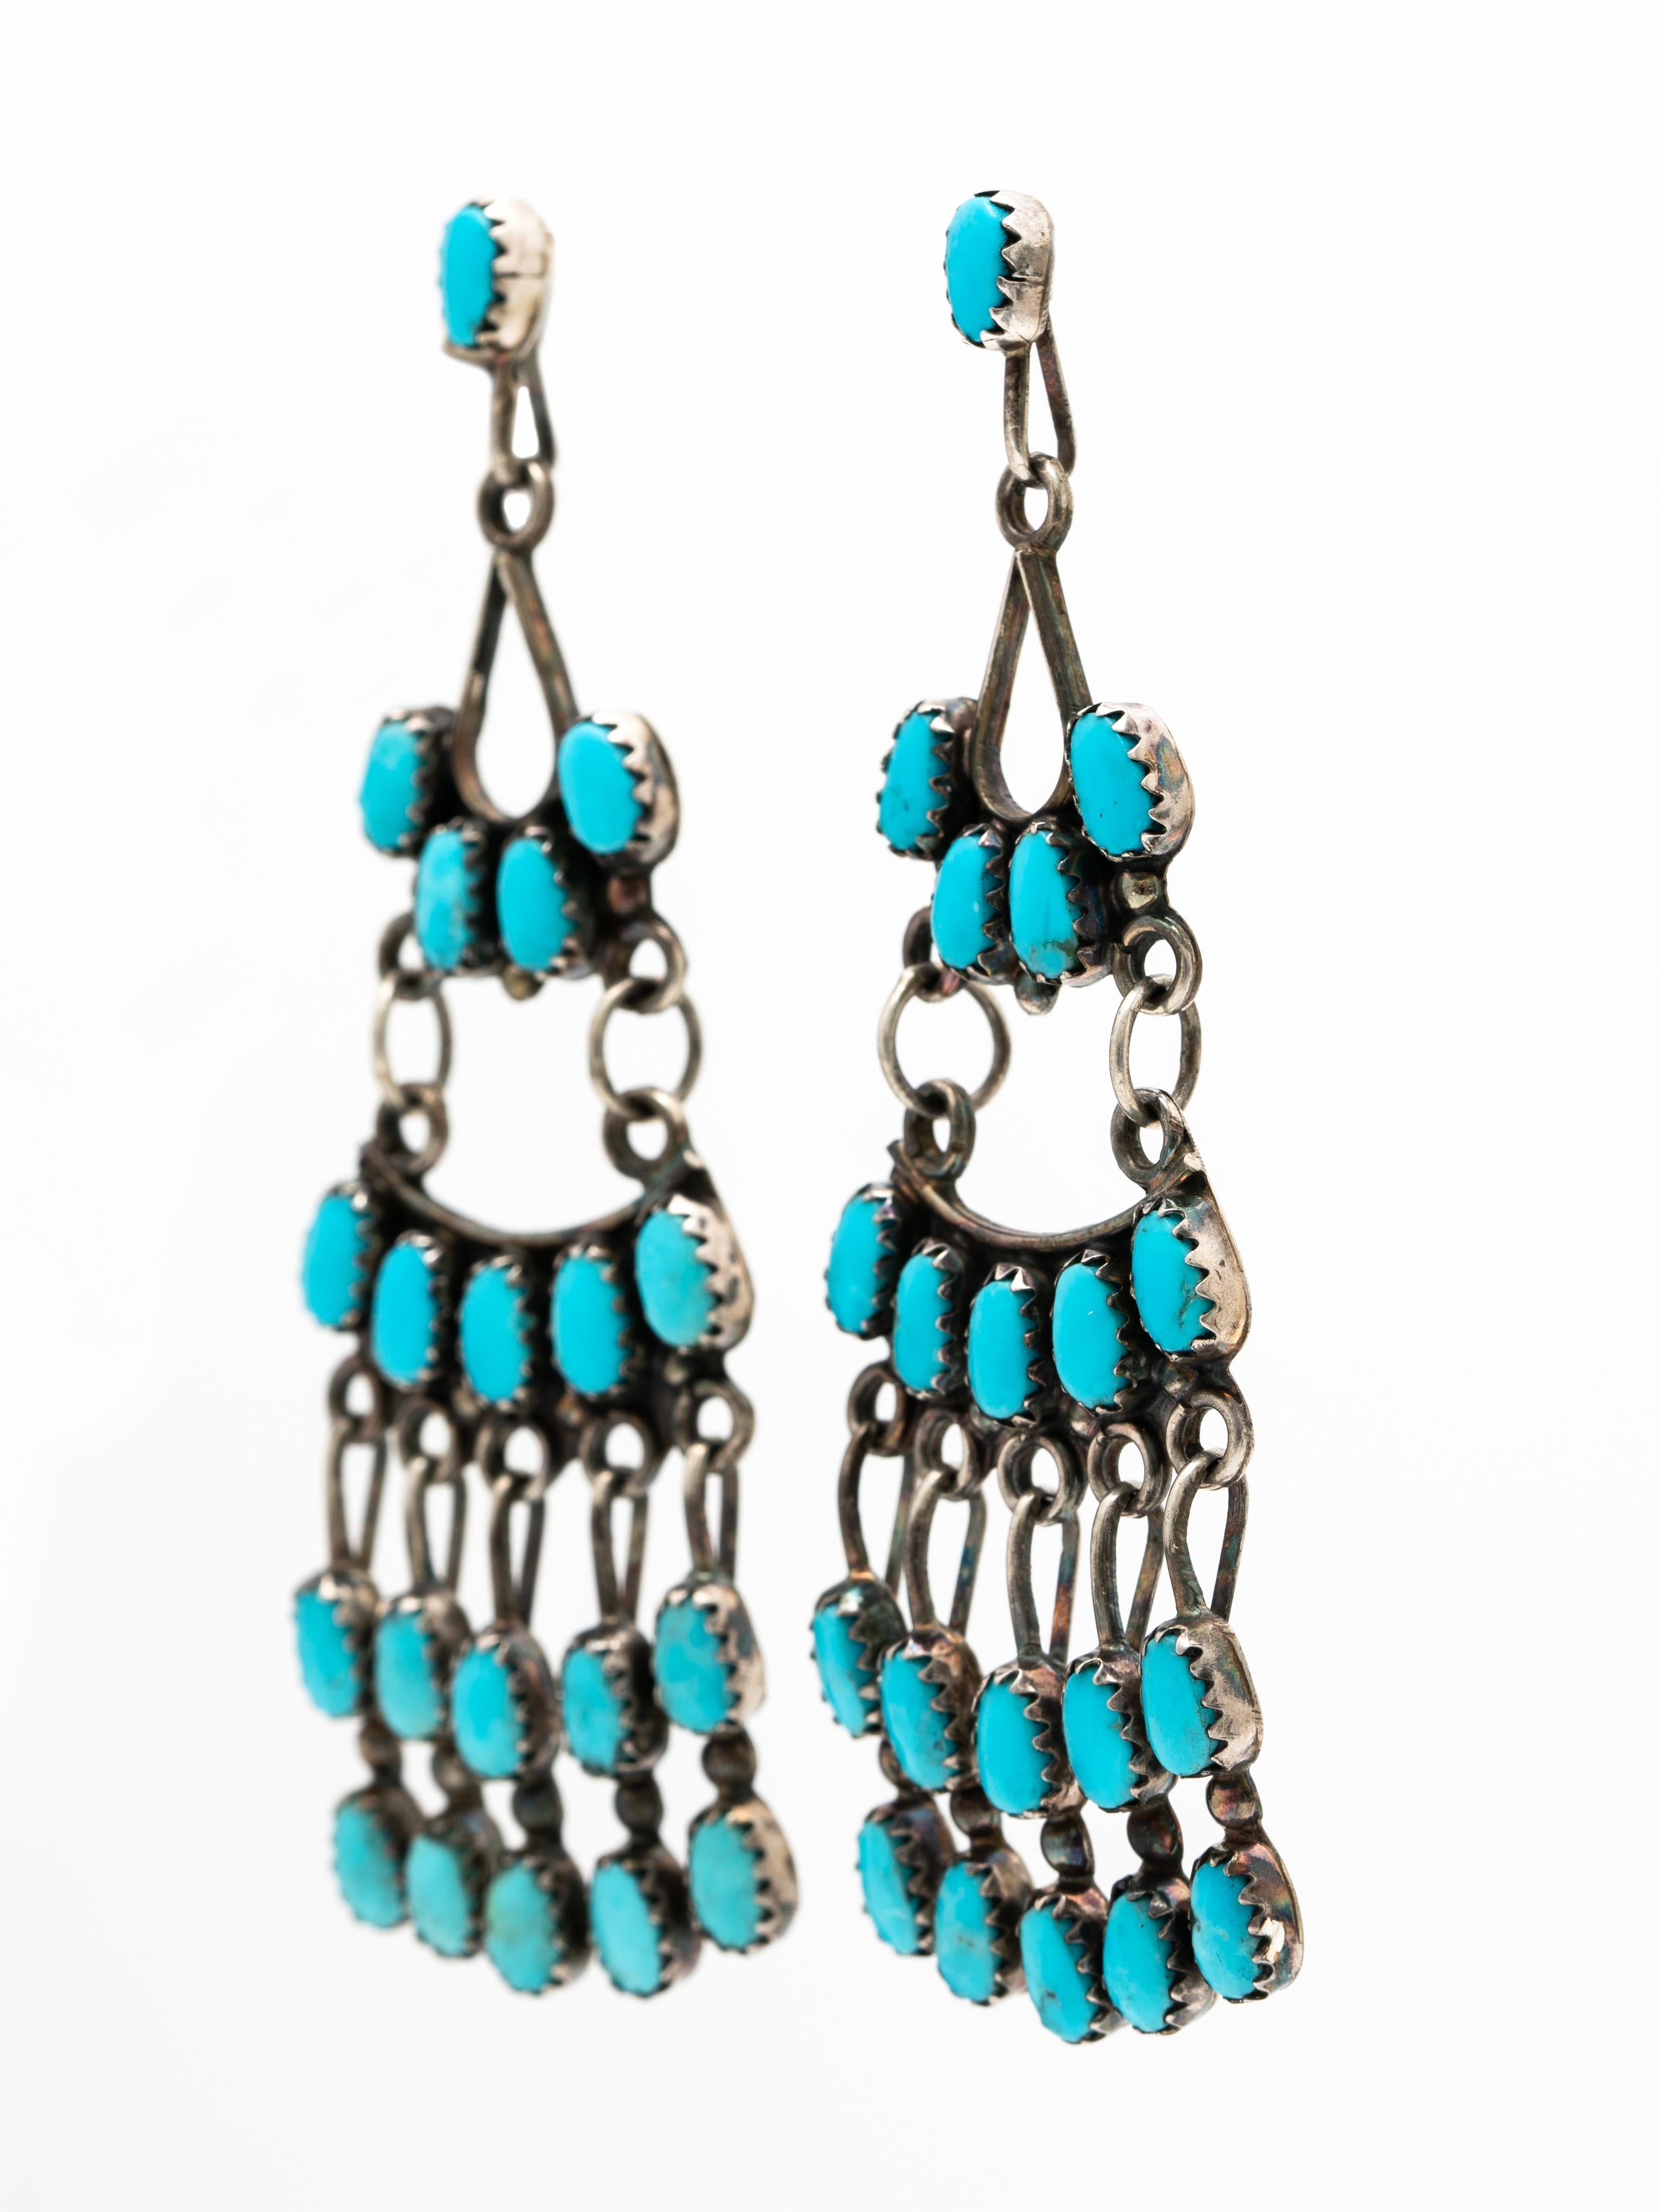 Signed Native American Zuni Silver and Turquoise Chandelier Fringe Earrings c.1970s

Beautiful, long and dramatic and influenced by Spanish jewelry

Length: 73.36mm
Width at widest point: 24.13mm
Weight per earrings: 7 grams
Signed: 
Zuni N.M (New